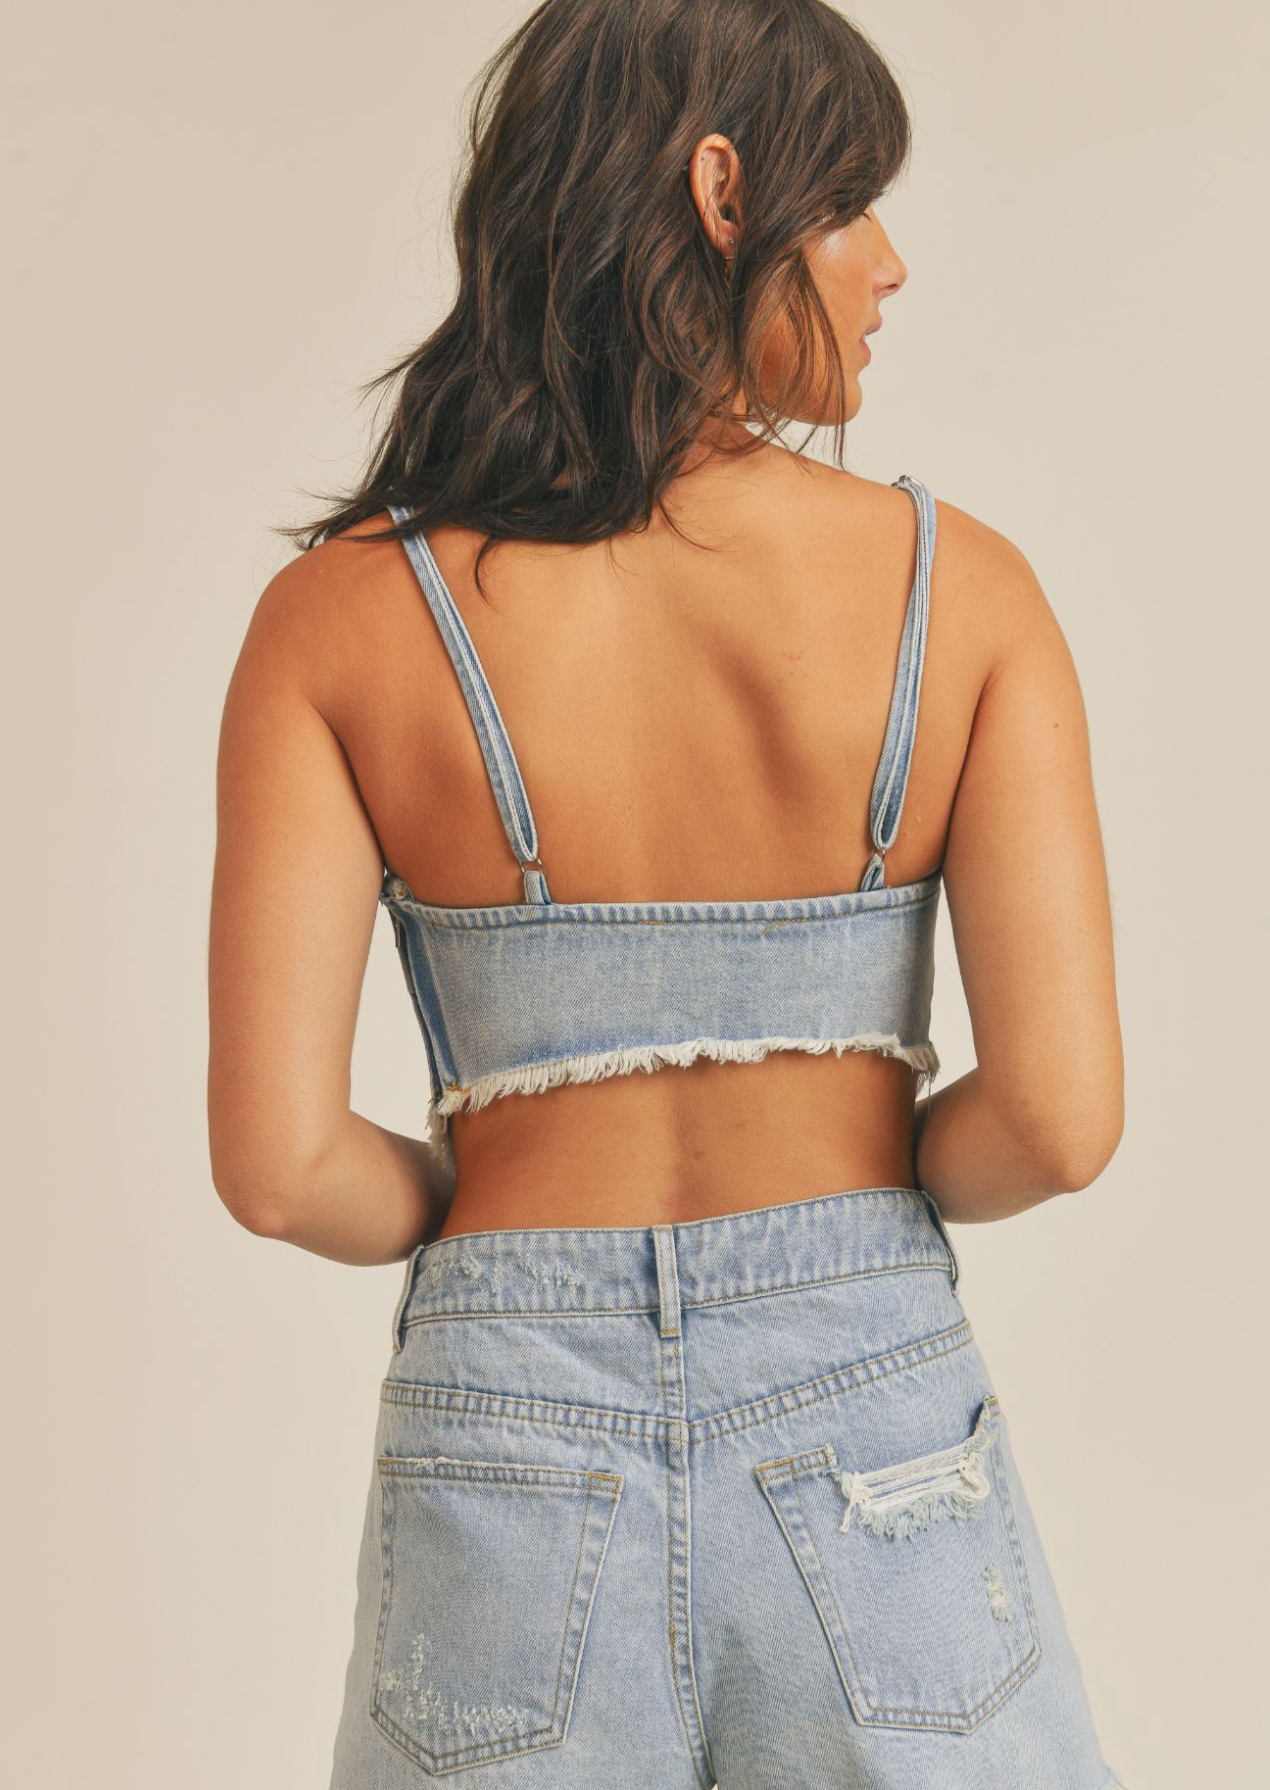 Sage The Label Young N Free Hanky Crop Top